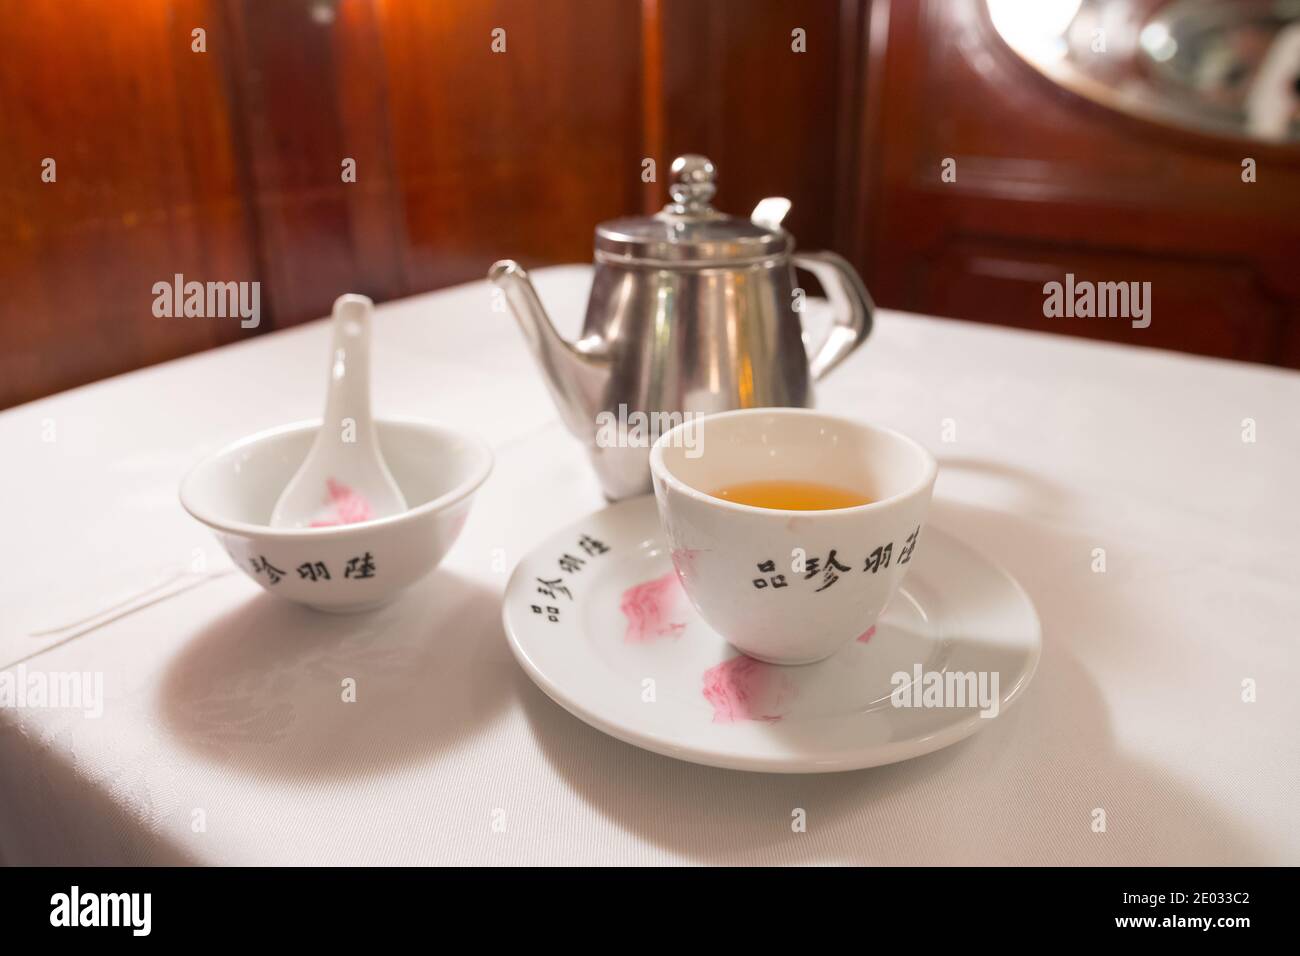 https://c8.alamy.com/comp/2E033C2/tea-service-on-a-white-table-iron-kettle-tea-cup-with-hot-tea-a-soup-bowl-special-spoon-beautiful-typical-chinese-restaurant-2E033C2.jpg